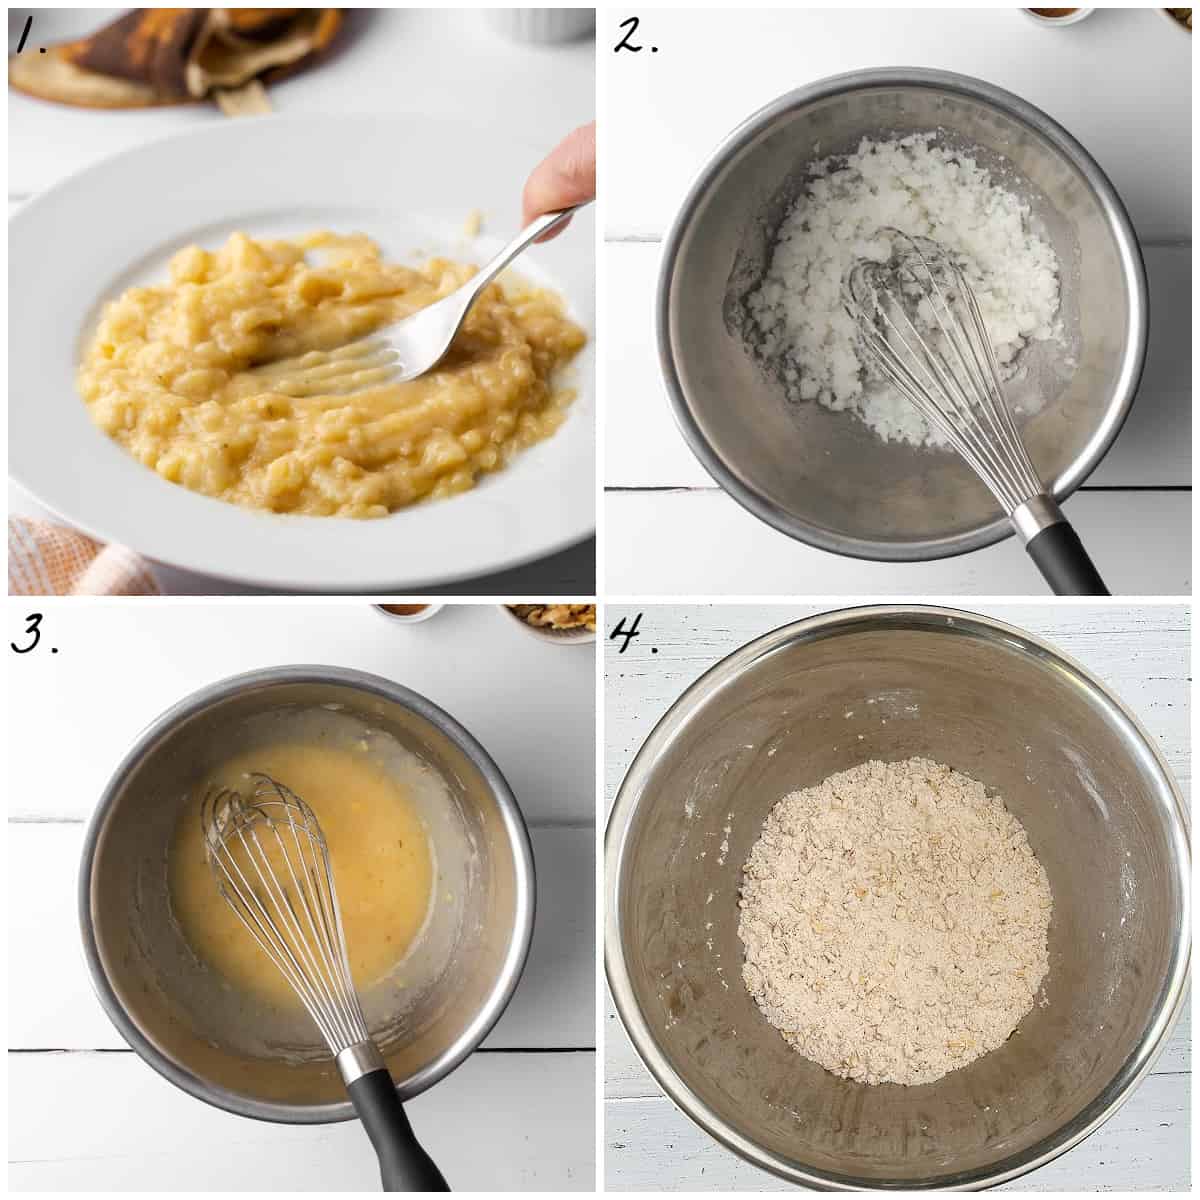 Four process photos displaying how to mash banana, combine sugar and oil, whisking wet ingredients together and whisking dry ingredients in a bowl. 